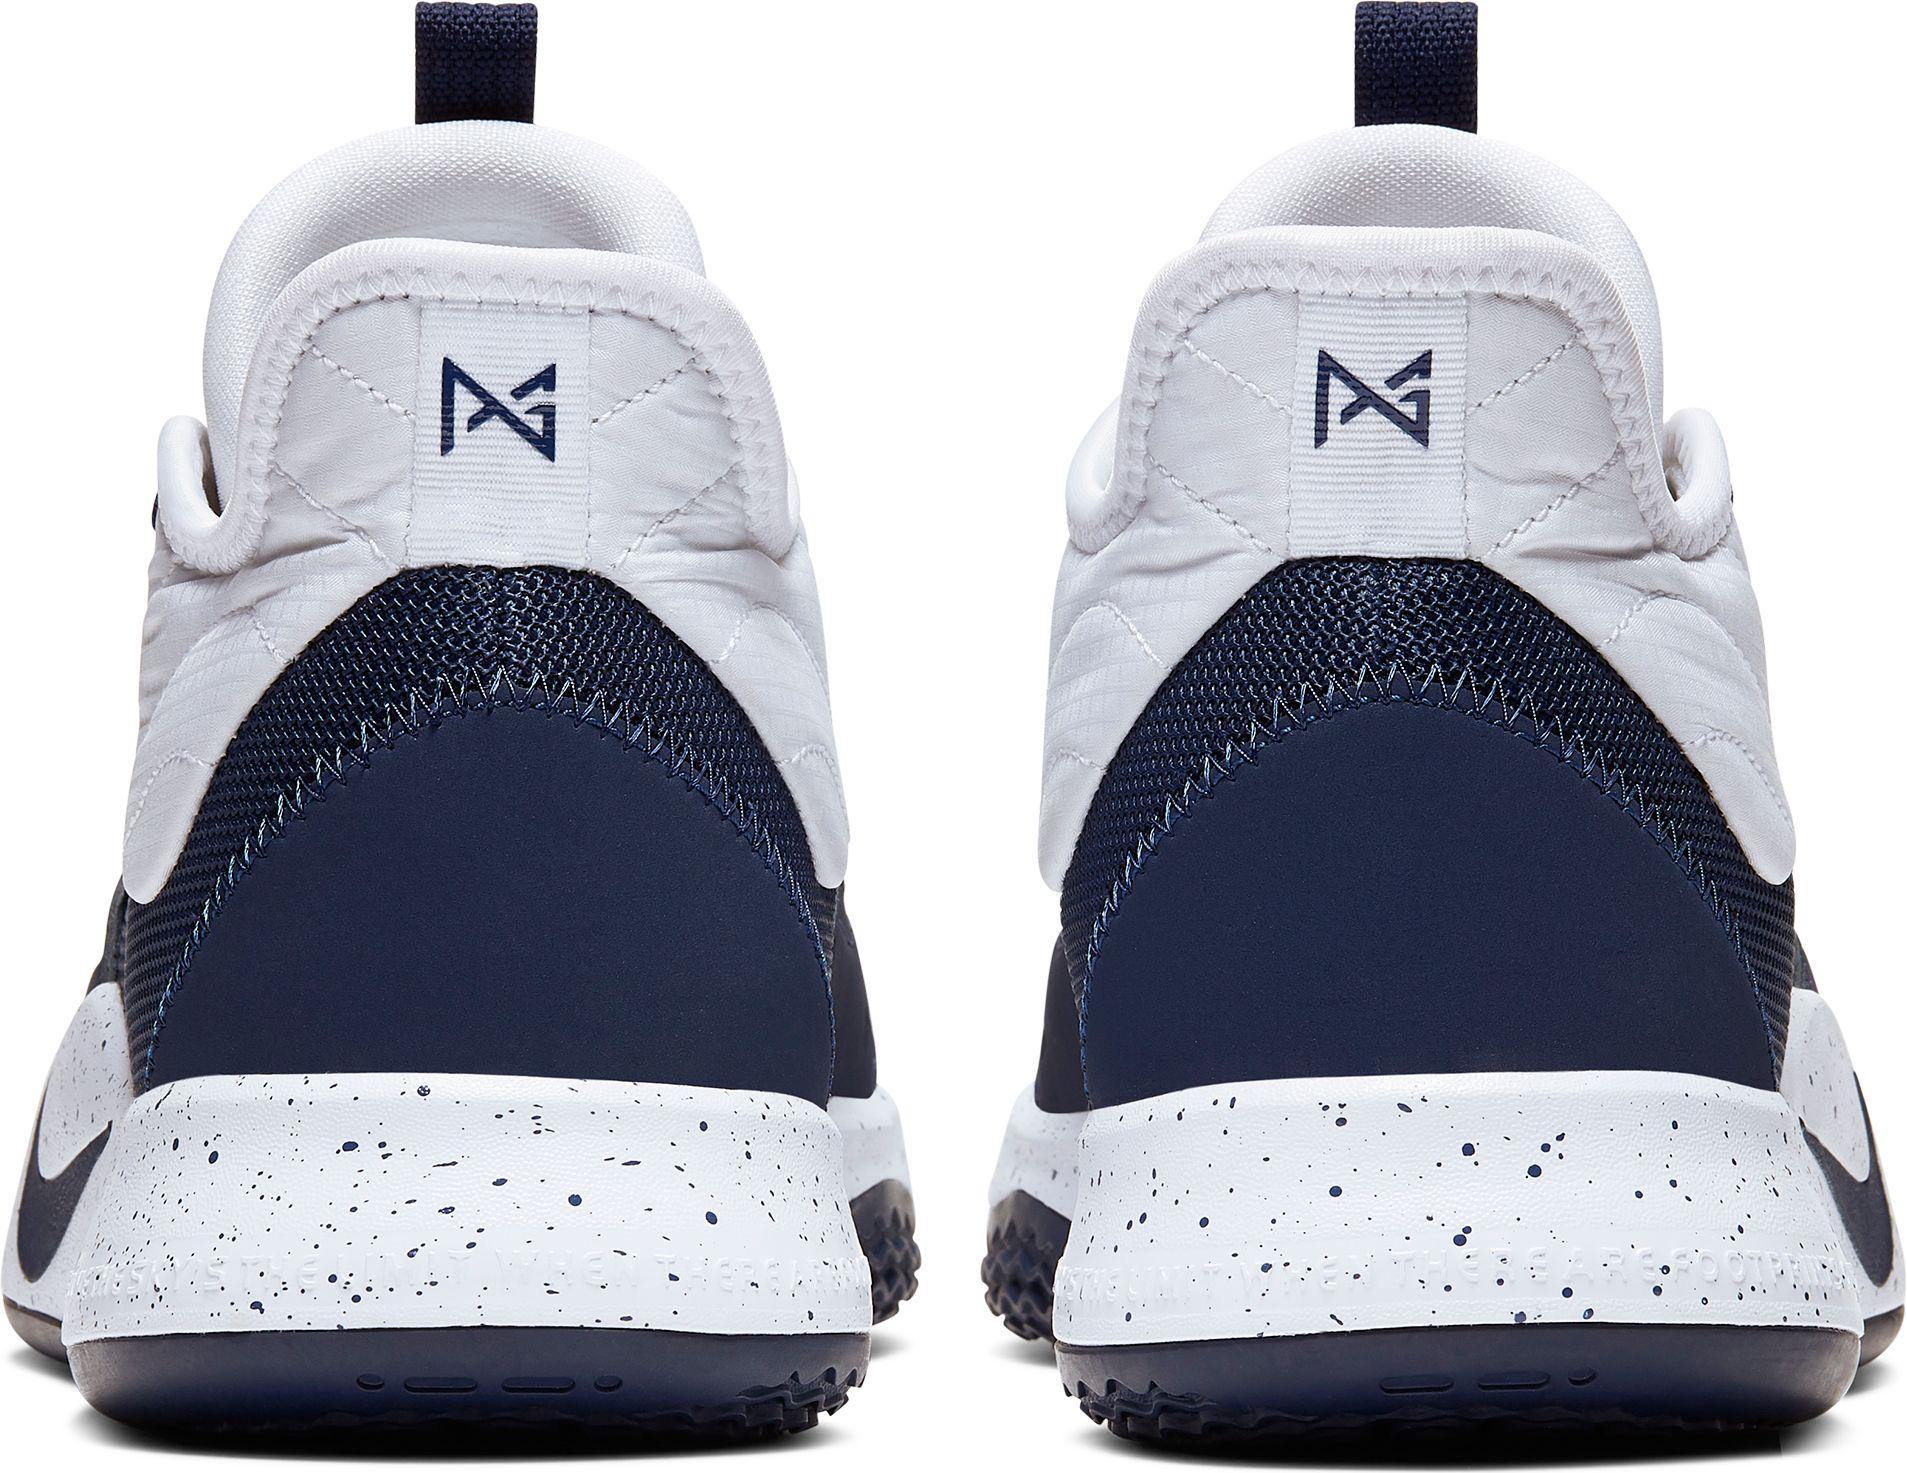 white and navy blue basketball shoes